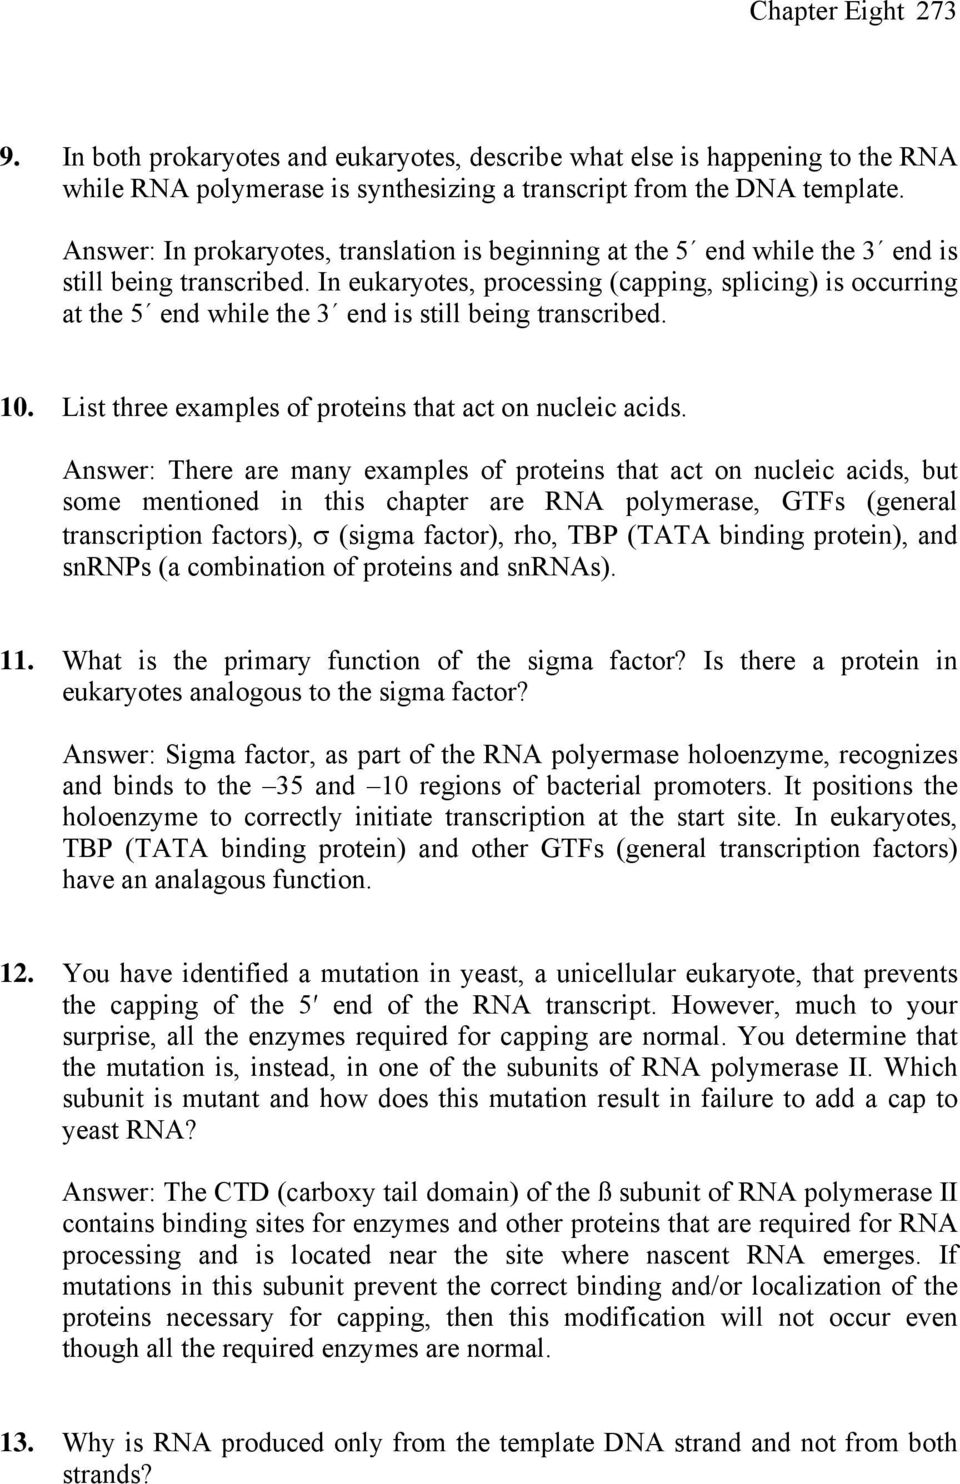 In eukaryotes, processing (capping, splicing) is occurring at the 5 end while the 3 end is still being transcribed. 10. List three examples of proteins that act on nucleic acids.